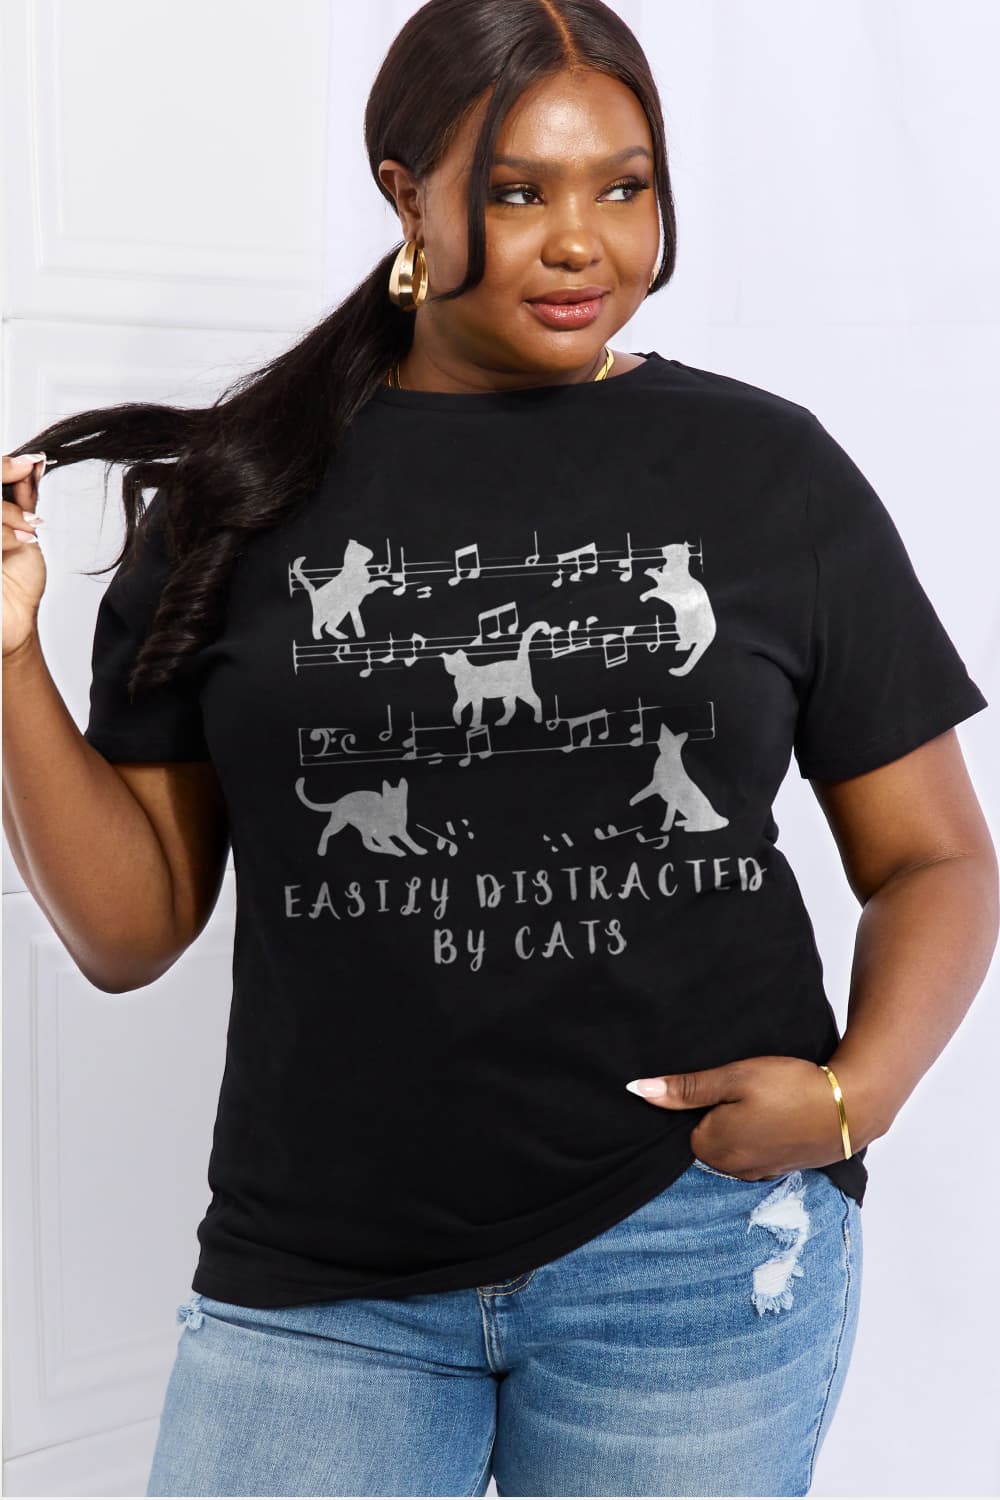 EASILY DISTRACTED BY CATS Graphic Cotton Tee